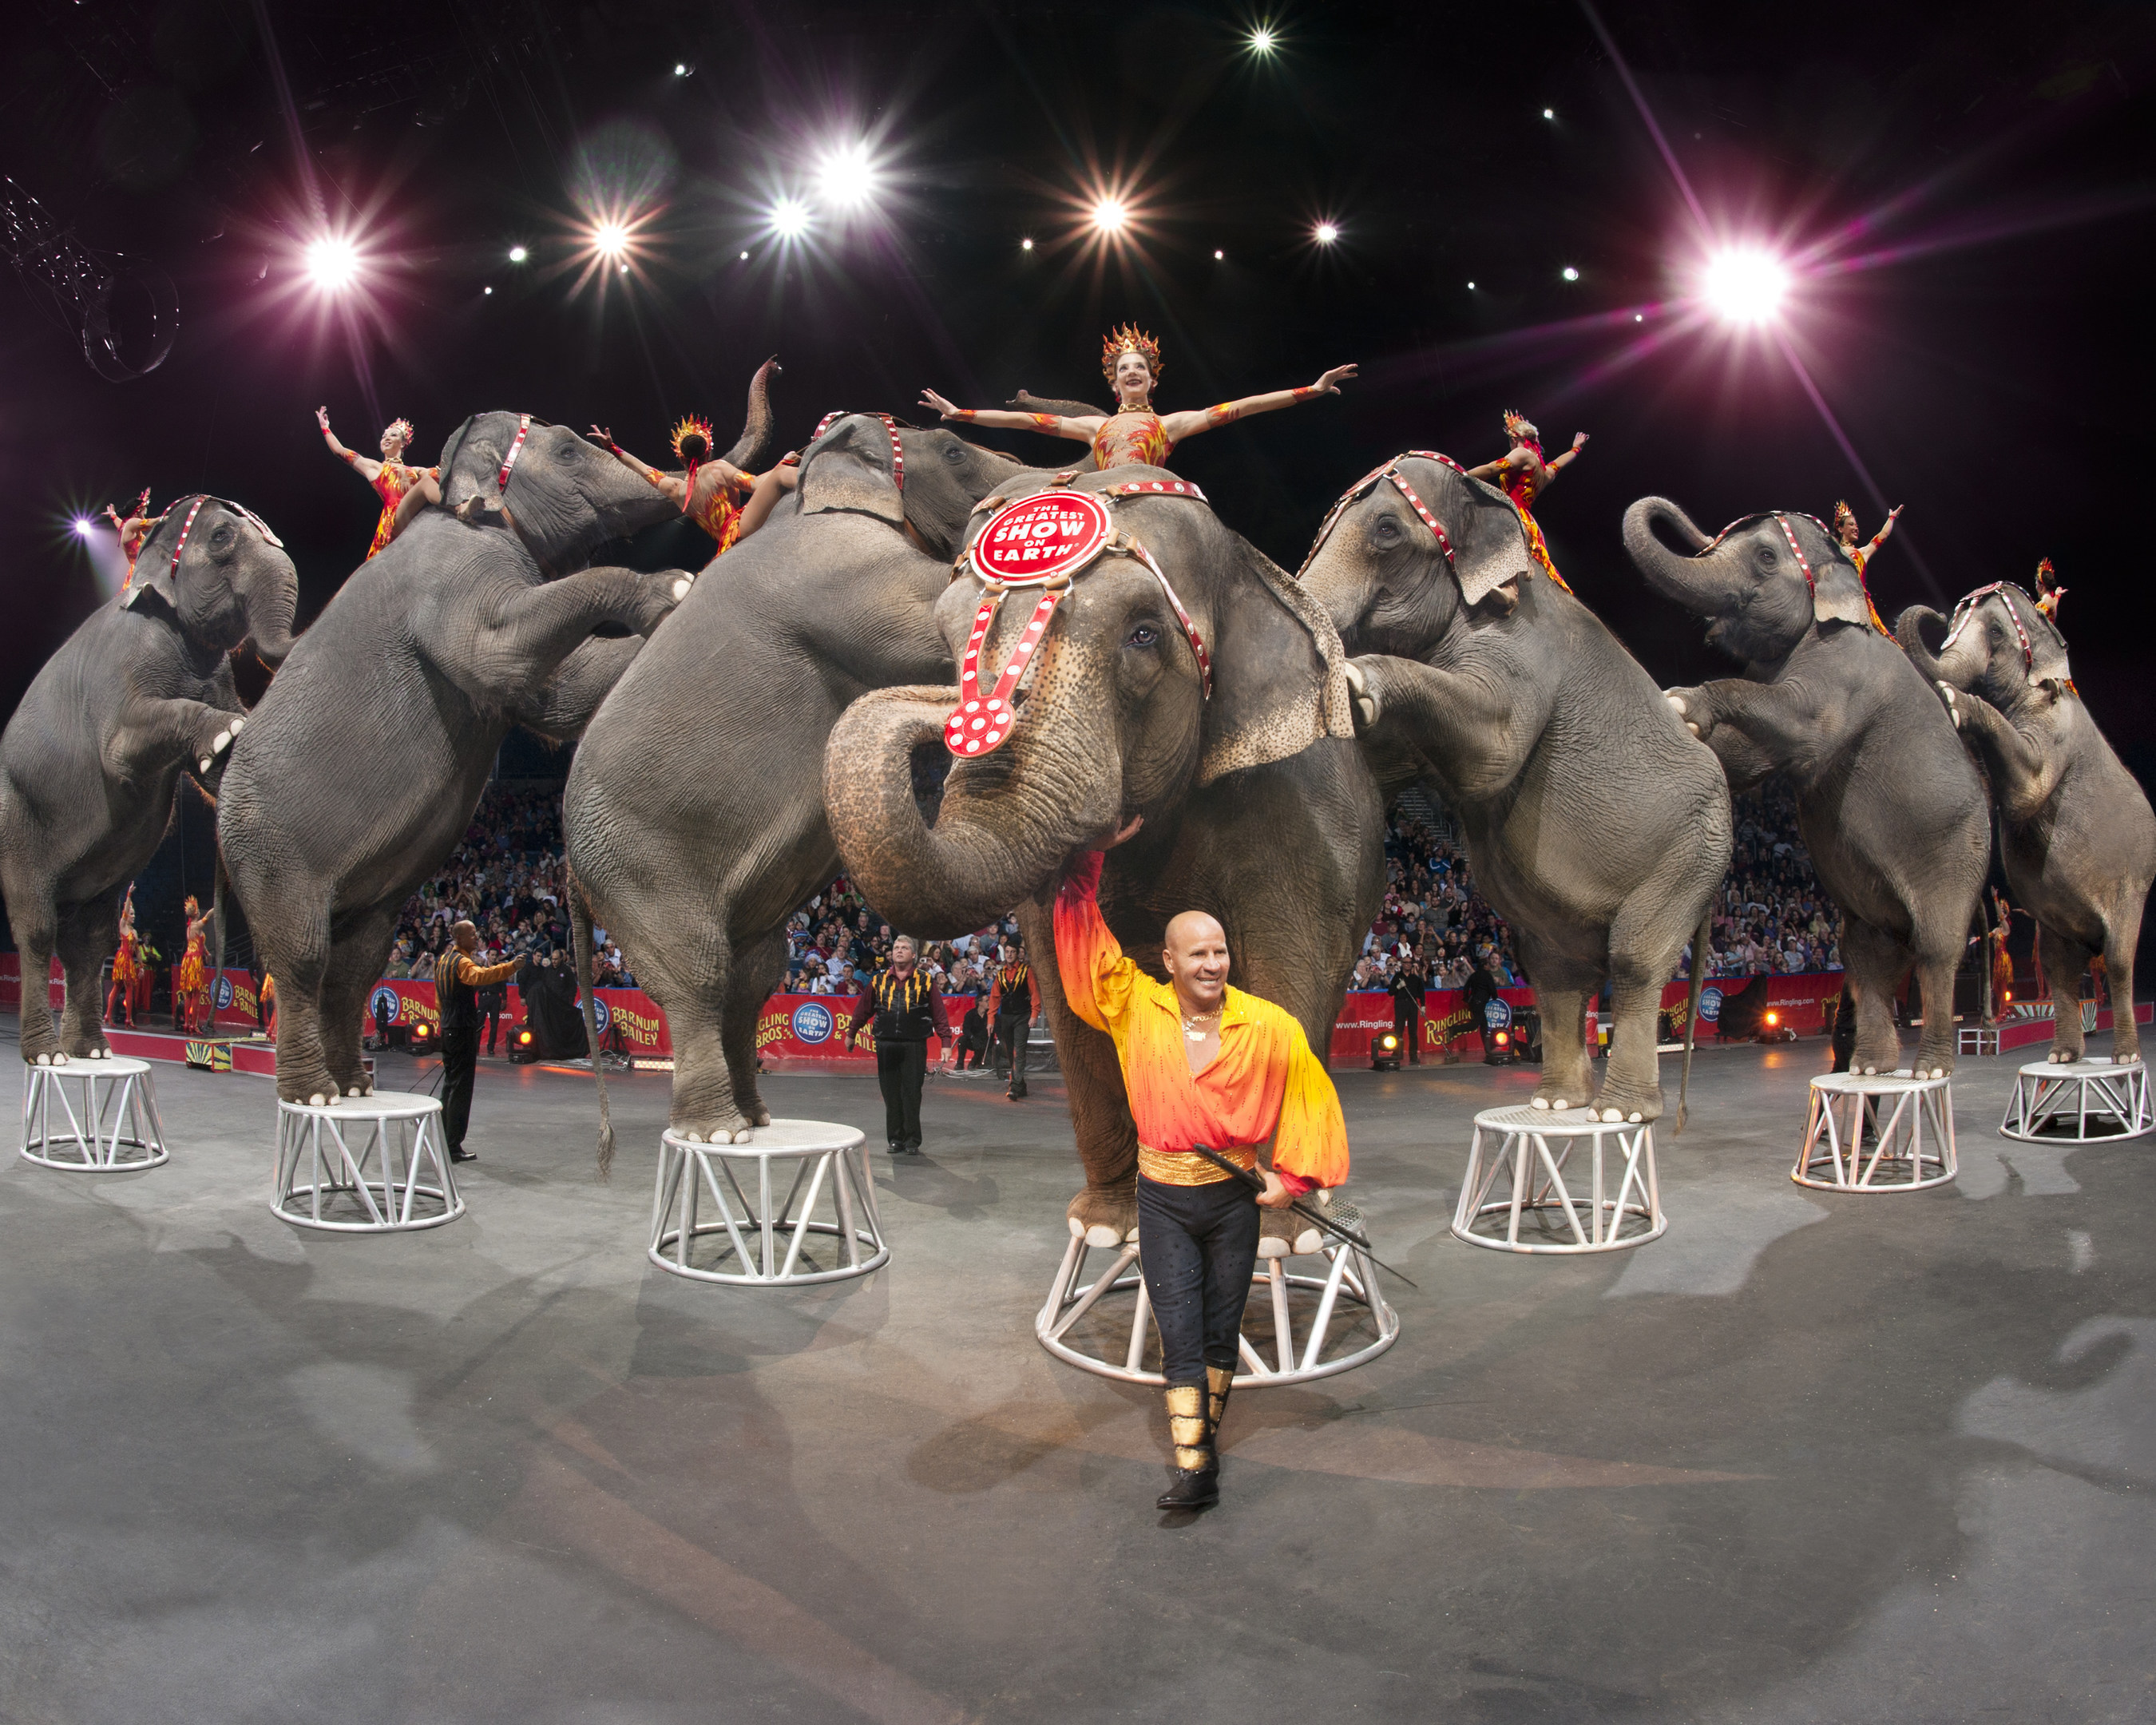 Ringling Bros. Producers Search for an Amazing and Memorable Modern Anthem To Proudly Promote The Greatest Show On Earth(R)